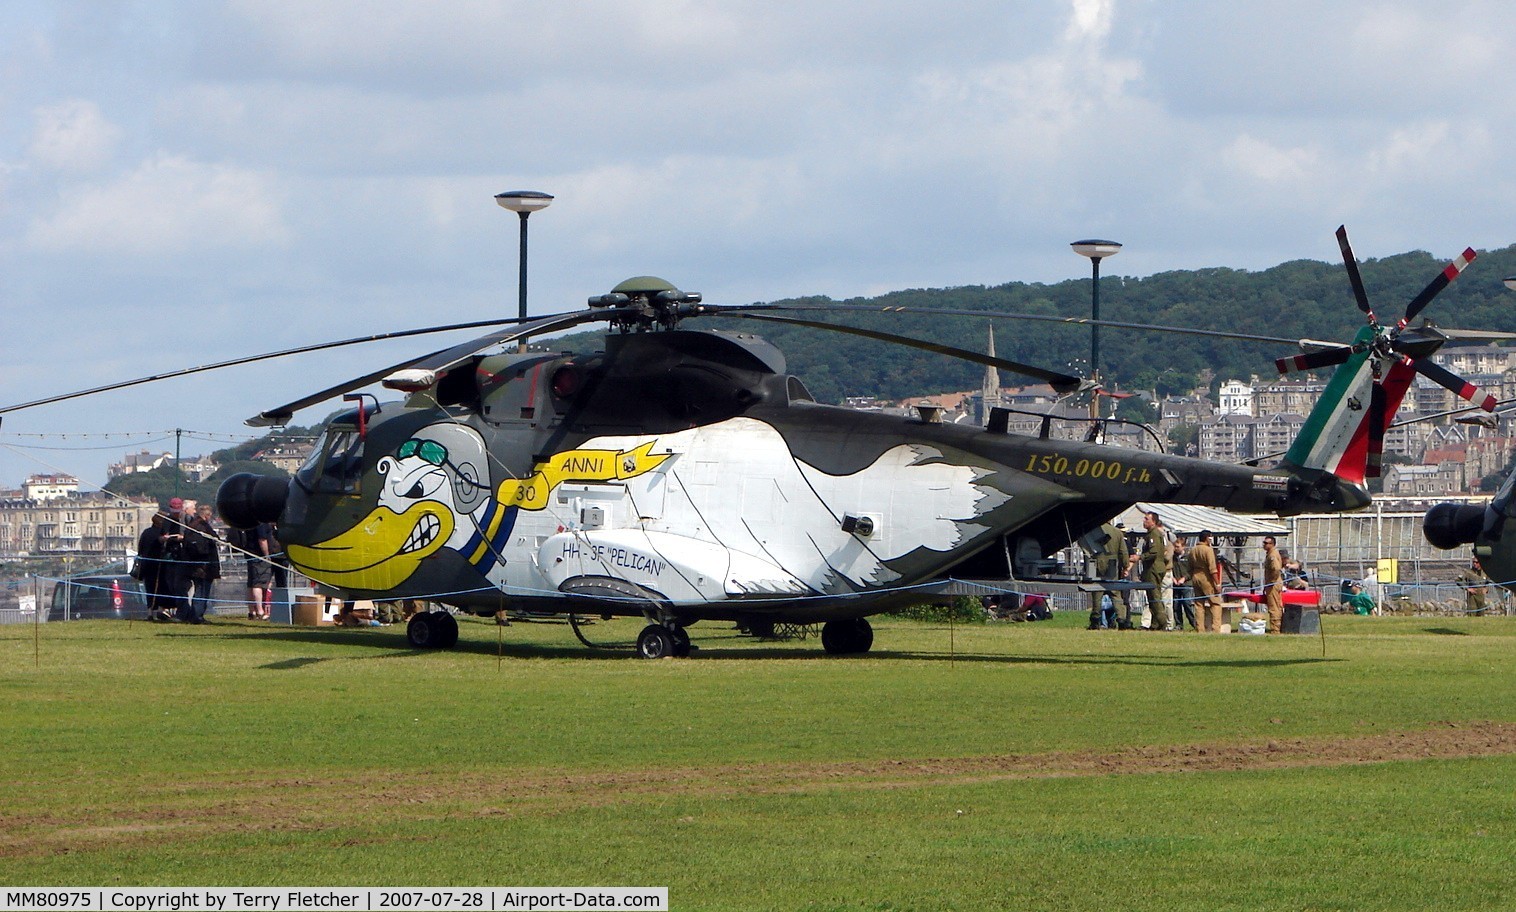 MM80975, Agusta HH-3F Pelican C/N 6202, at Helidays 2007 at Weston-Super-Mare , UK